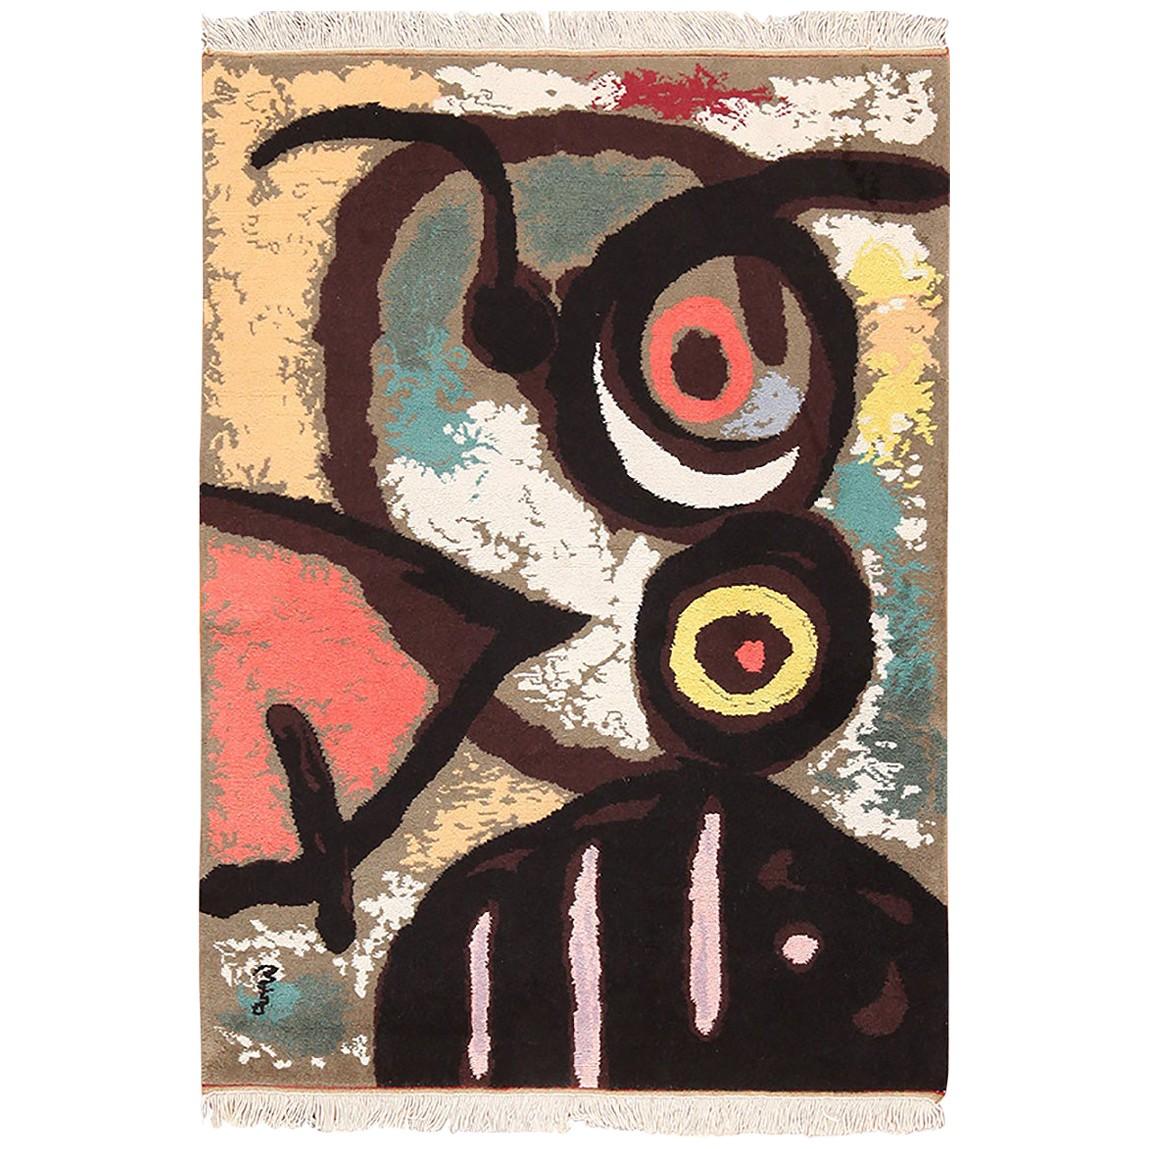 Vintage Art Rug Based On Joan Miro. Size: 4 ft 10 in x 3 ft 5 in